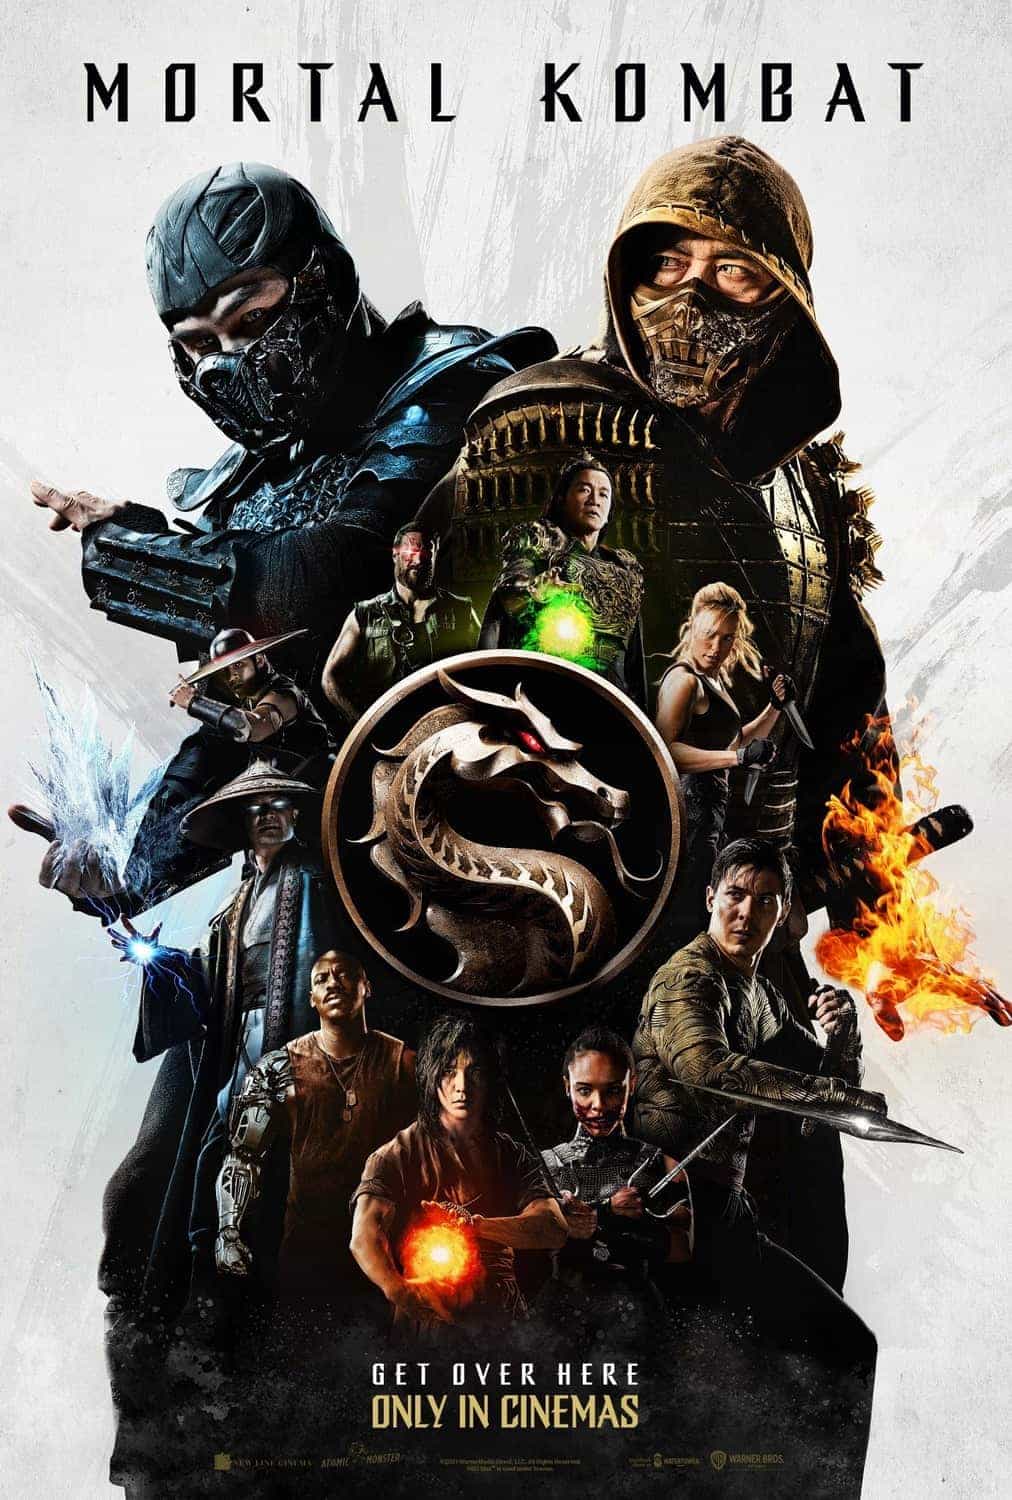 New trailer and poster for the 2021 movie version of Mortal Kombat starring Jessica McNamee - movie release date 16th April 2021